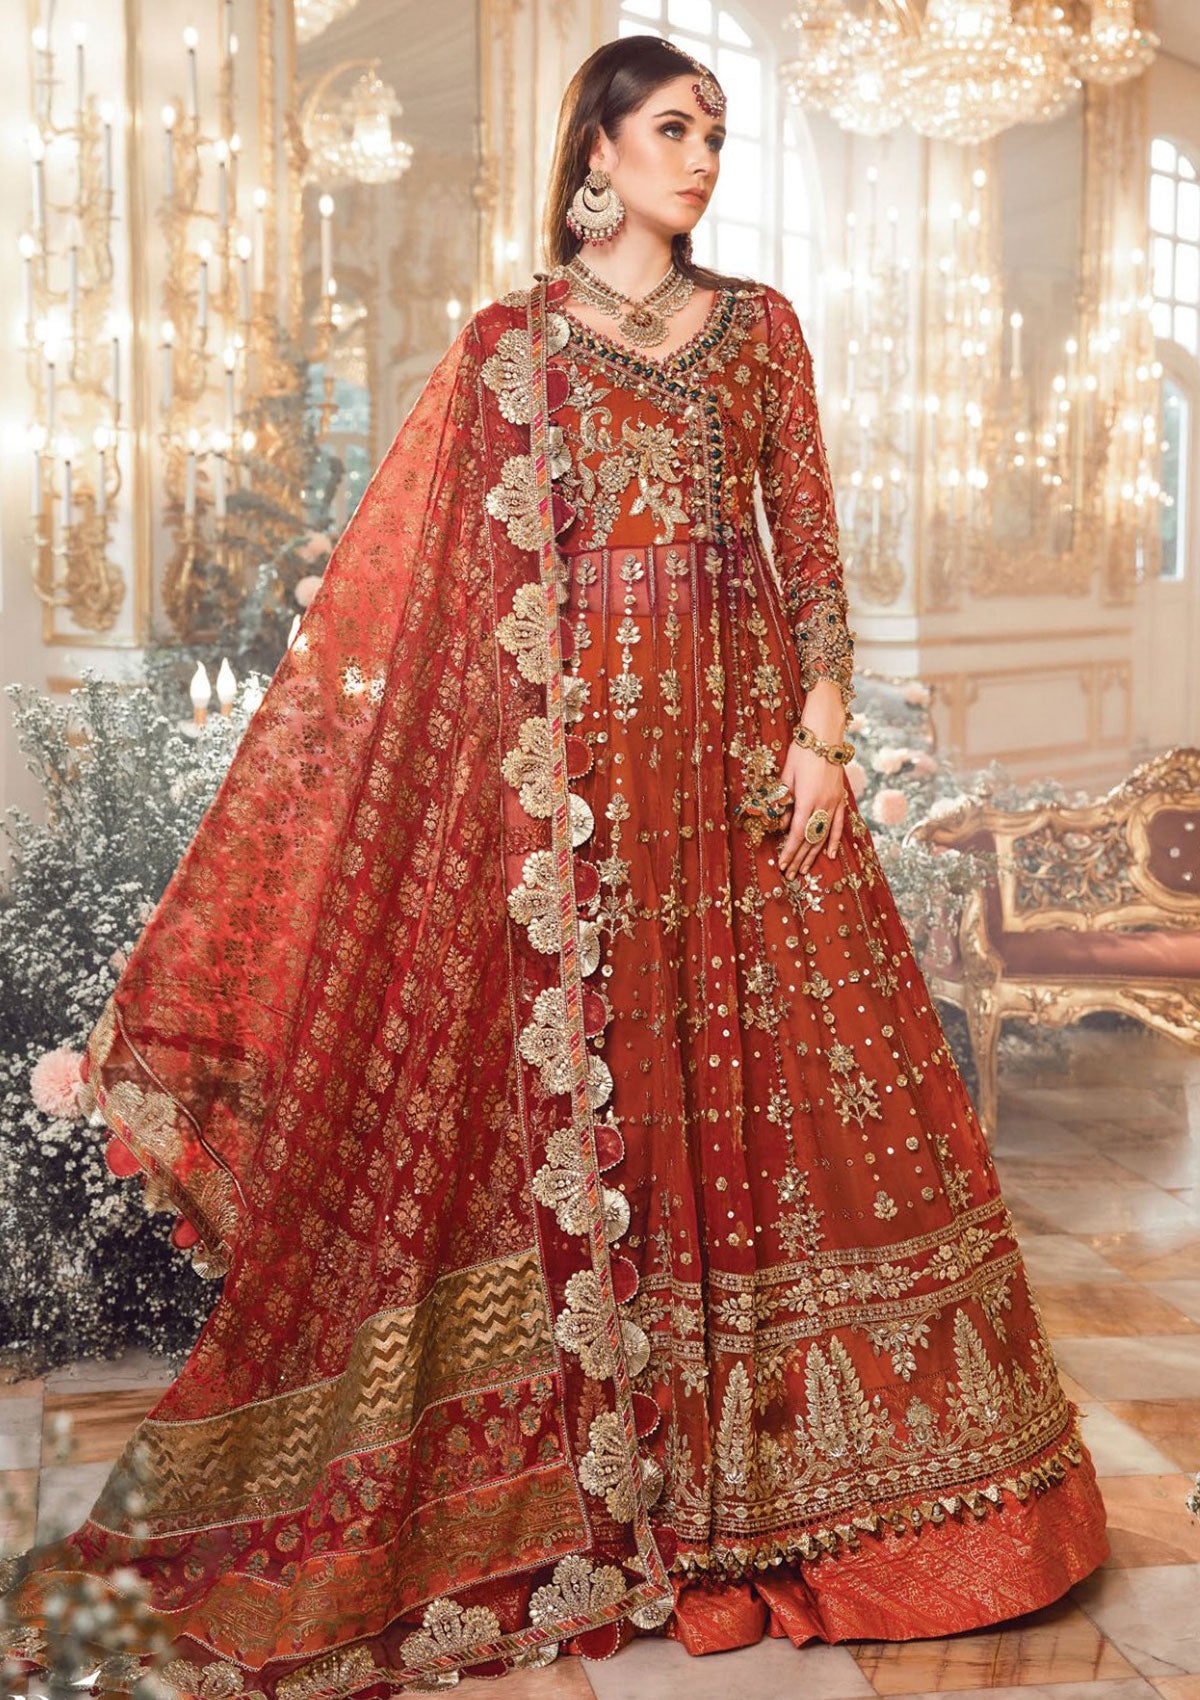 Formal Collection - Maria B - Mbroidered - Wedding Edition - MB23#5